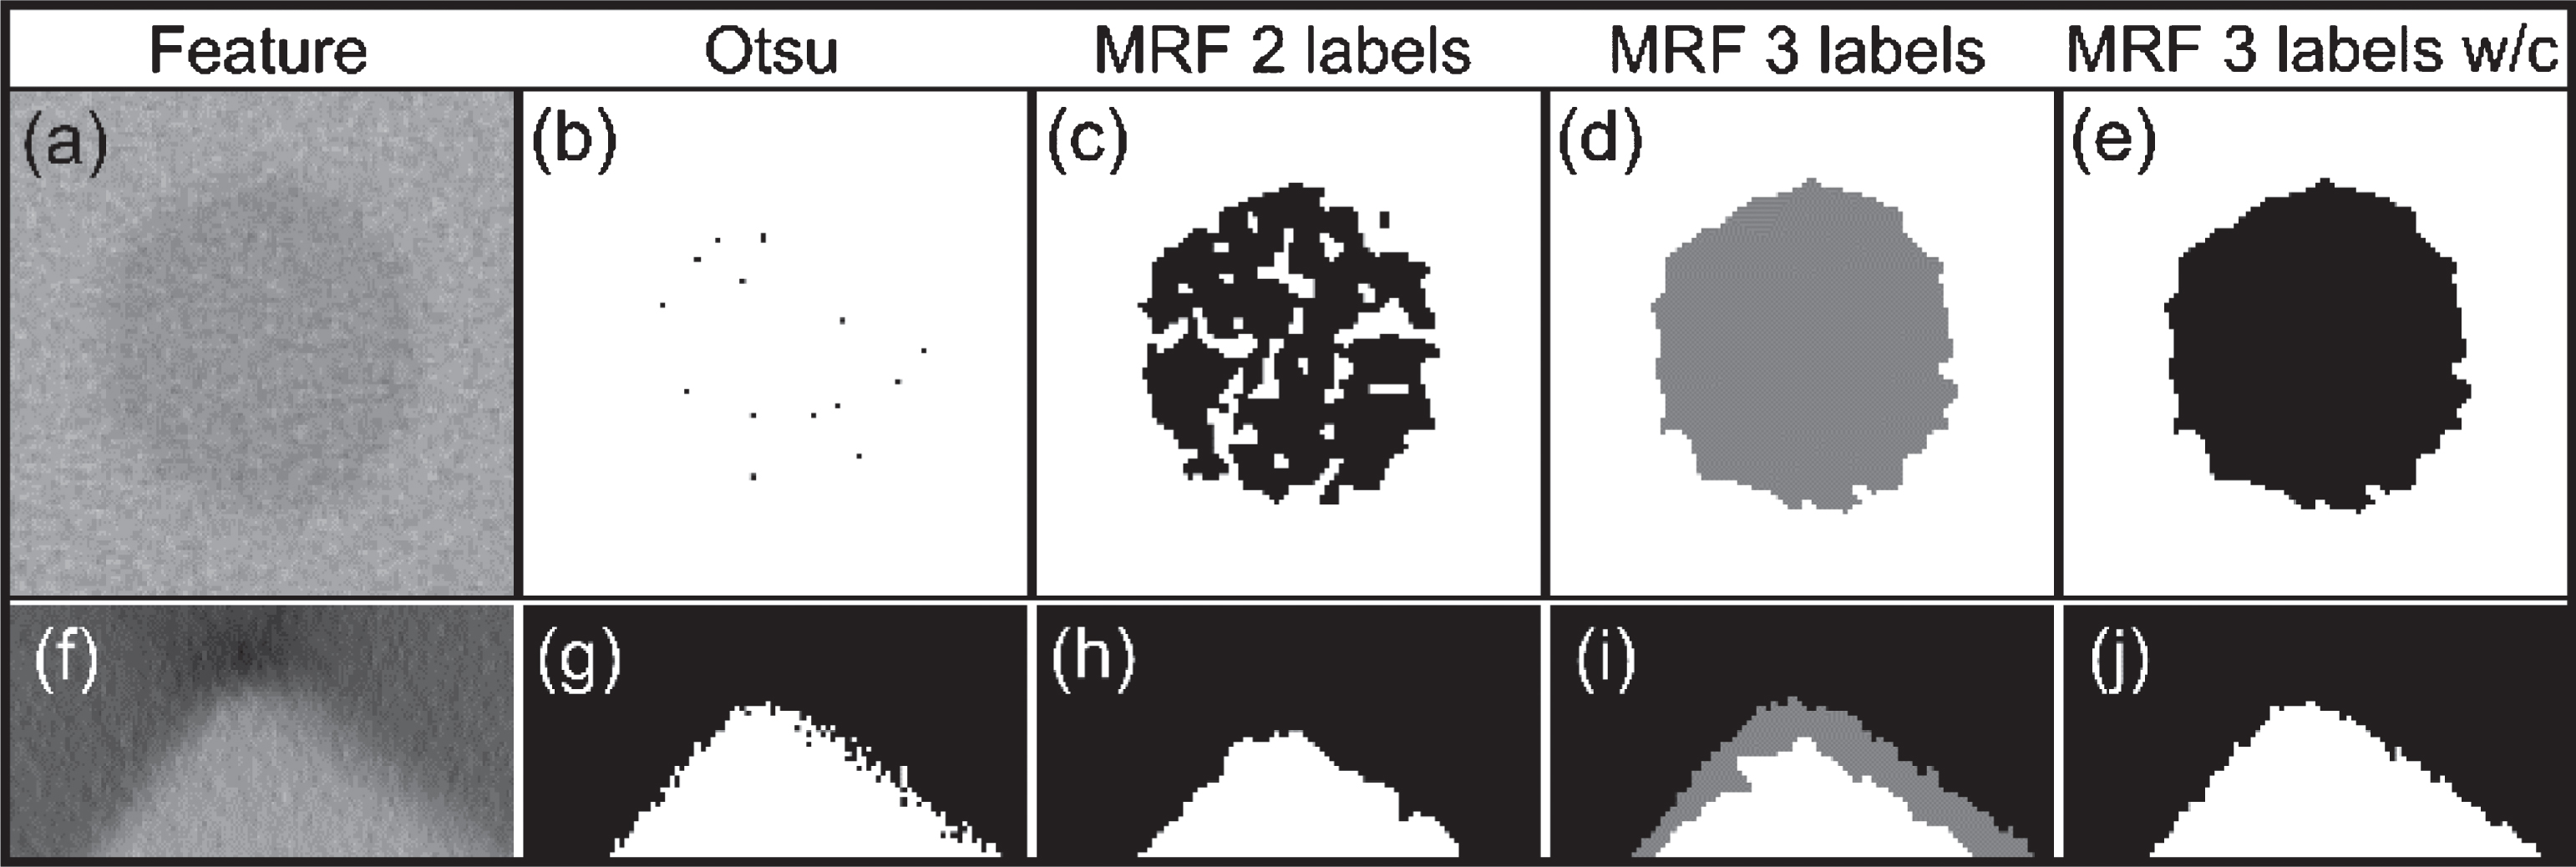 Two features from CT image in Fig. 7(a): (a) a hole and (f) a corner with their (b, g) Otsu, (c, h) MRF 2 labels, (d, i) MRF 3 labels, and (e, j) MRF 3 labels with constraint segmentations respectively. Note that methods are applied to whole image and cropped sections are shown here.